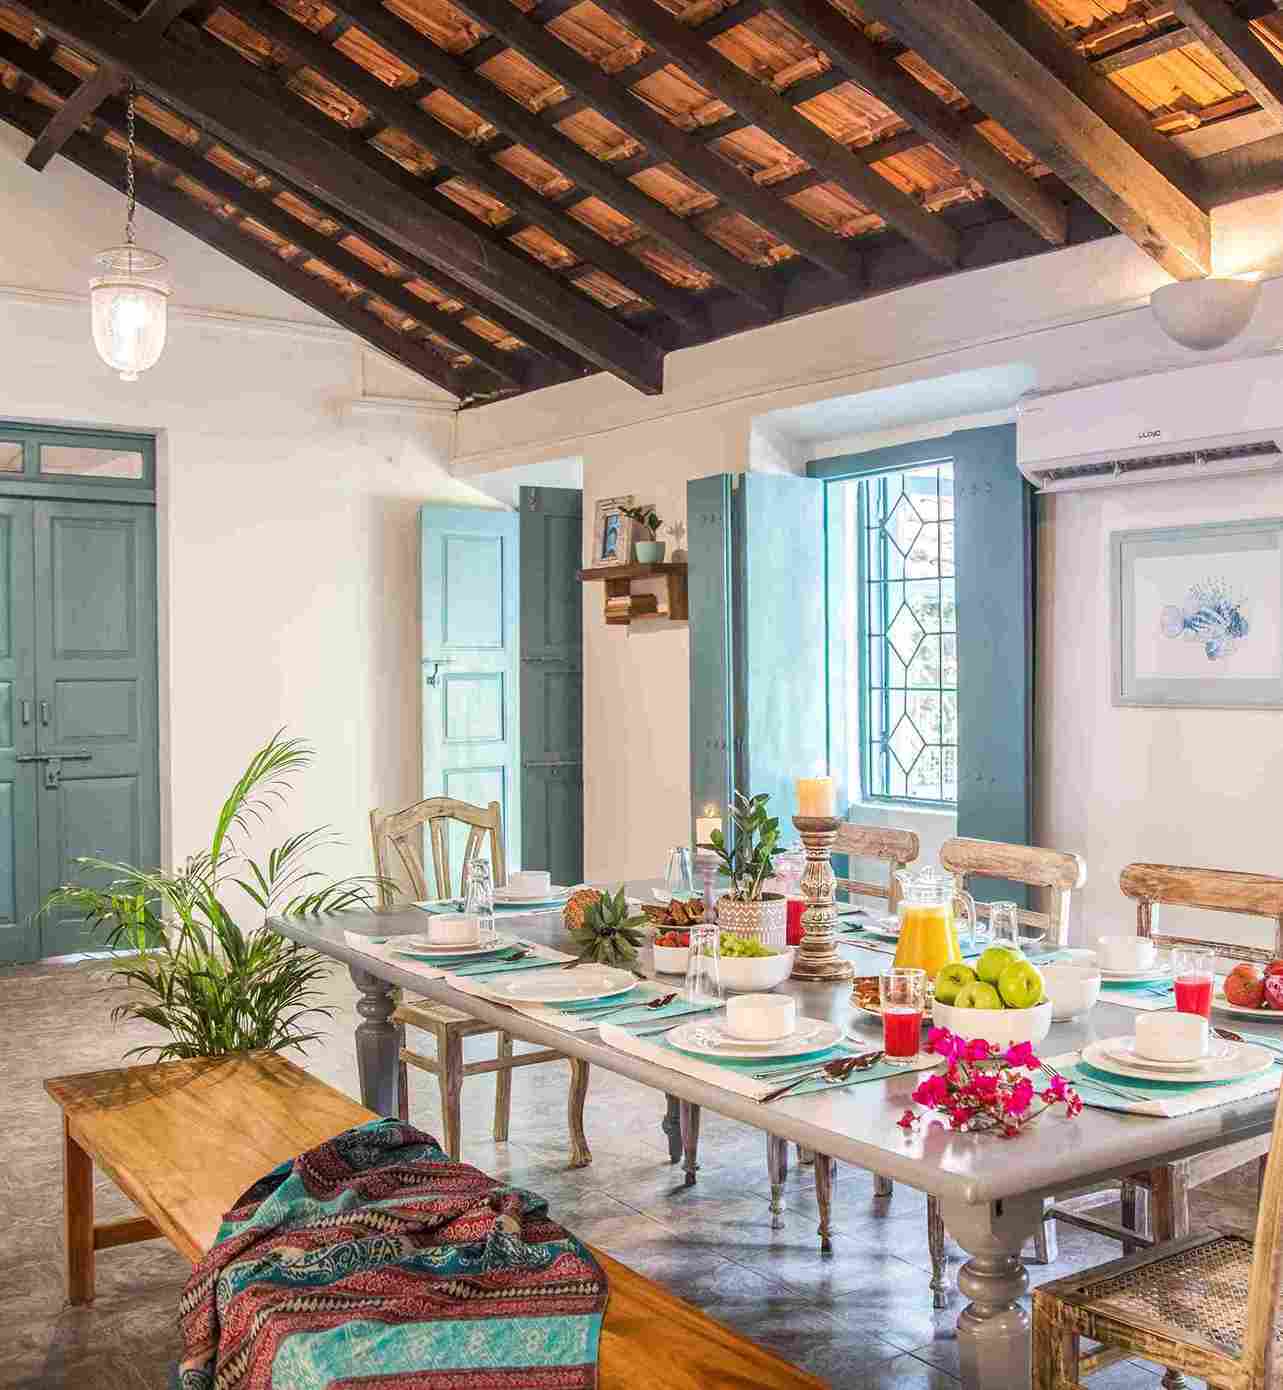 The dining area at Villa Saudade has natural wood as the main component with lights and decor sourced from local markets,